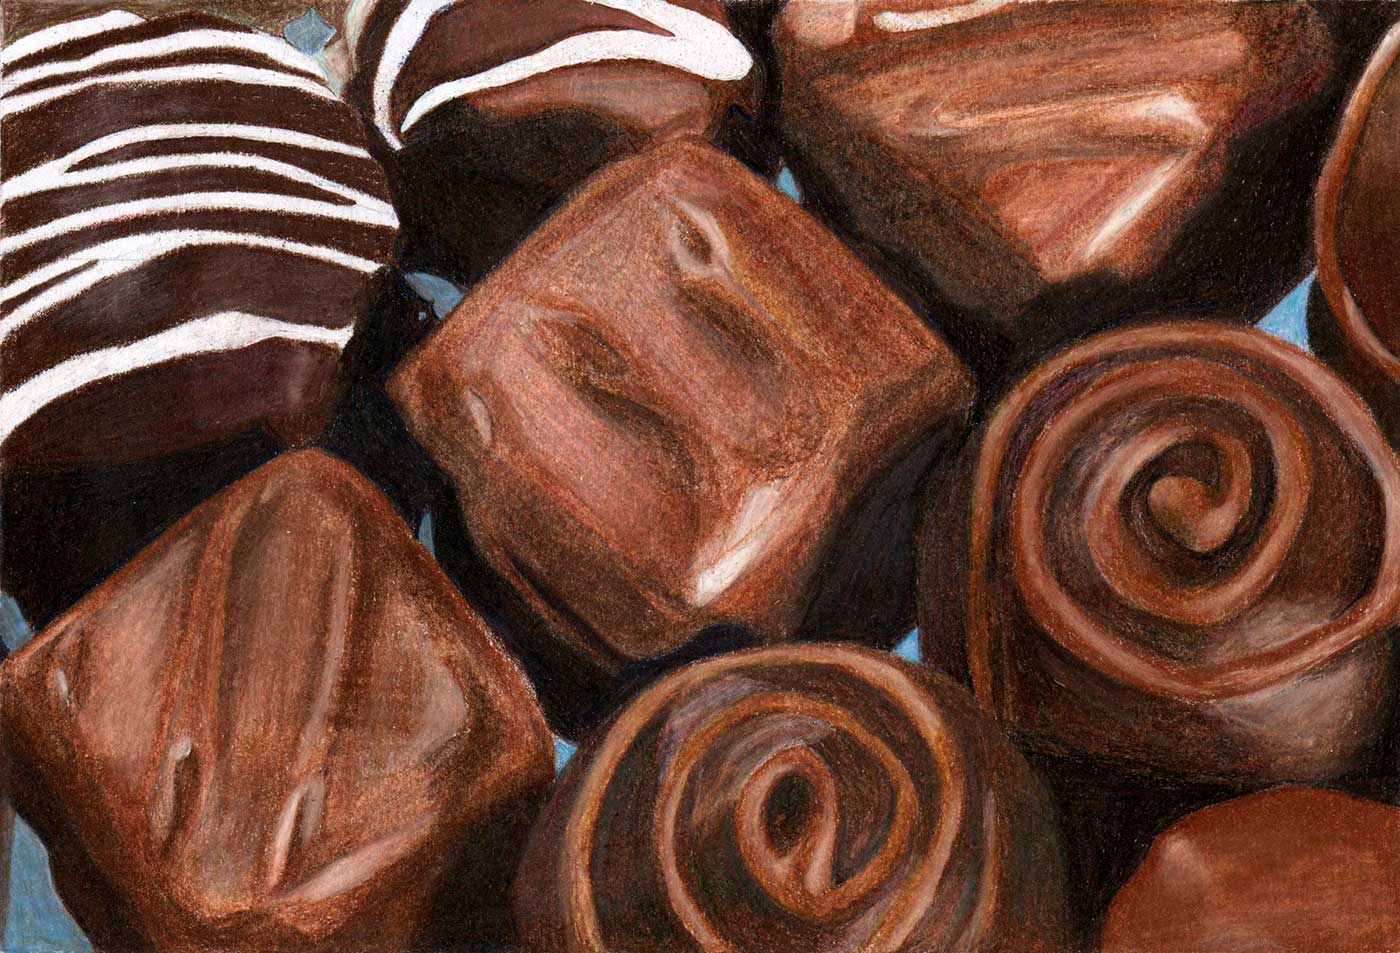 drawing of filled chocolate candy.